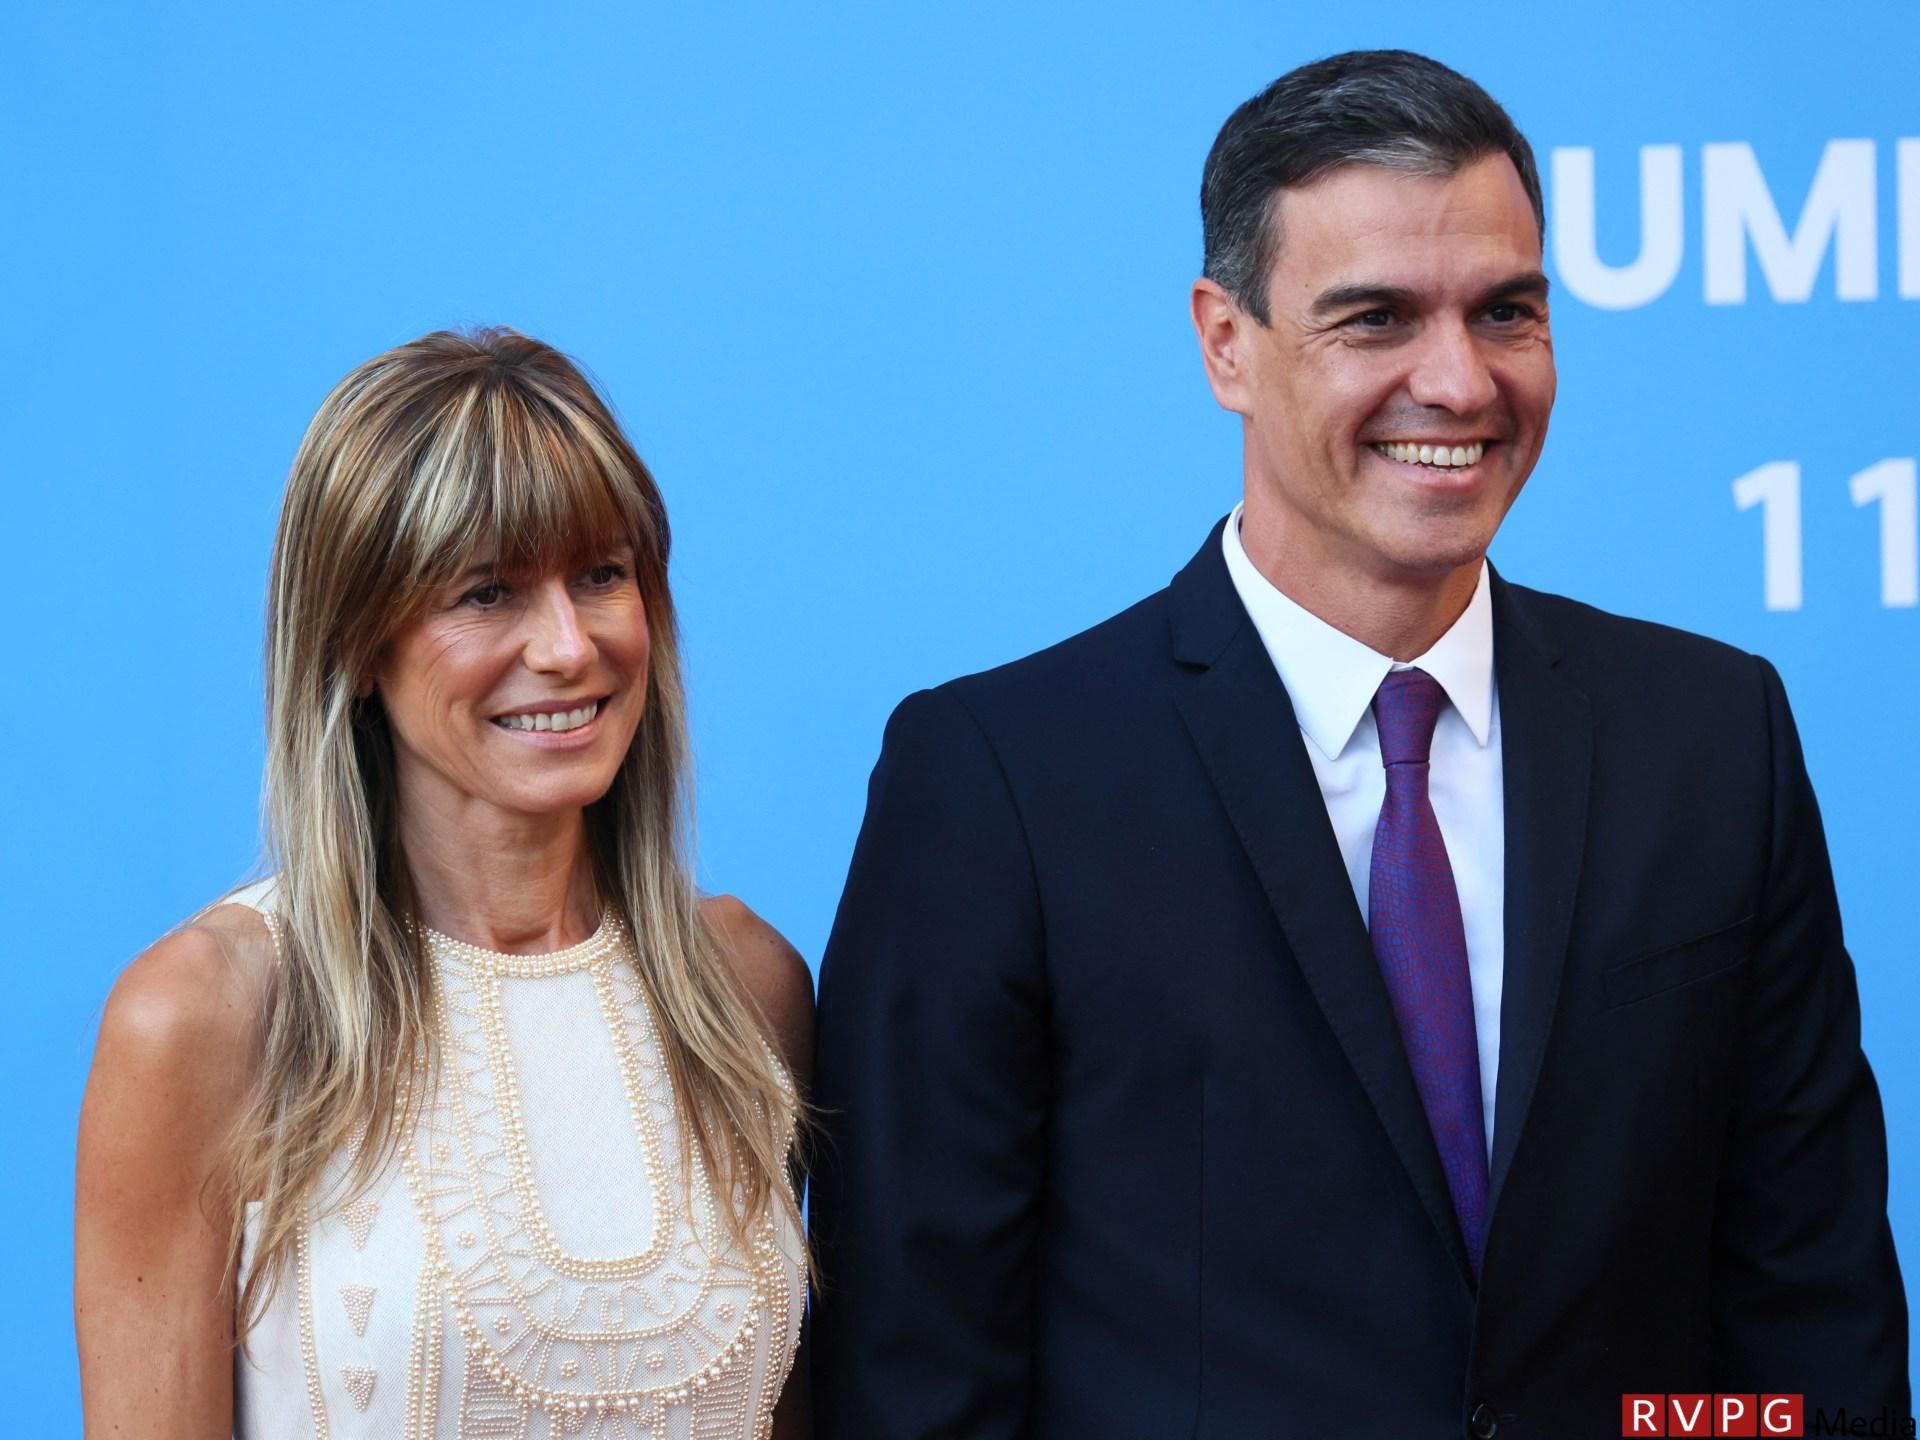 Spain's public prosecutor requests that corruption proceedings against Sanchez's wife be dropped